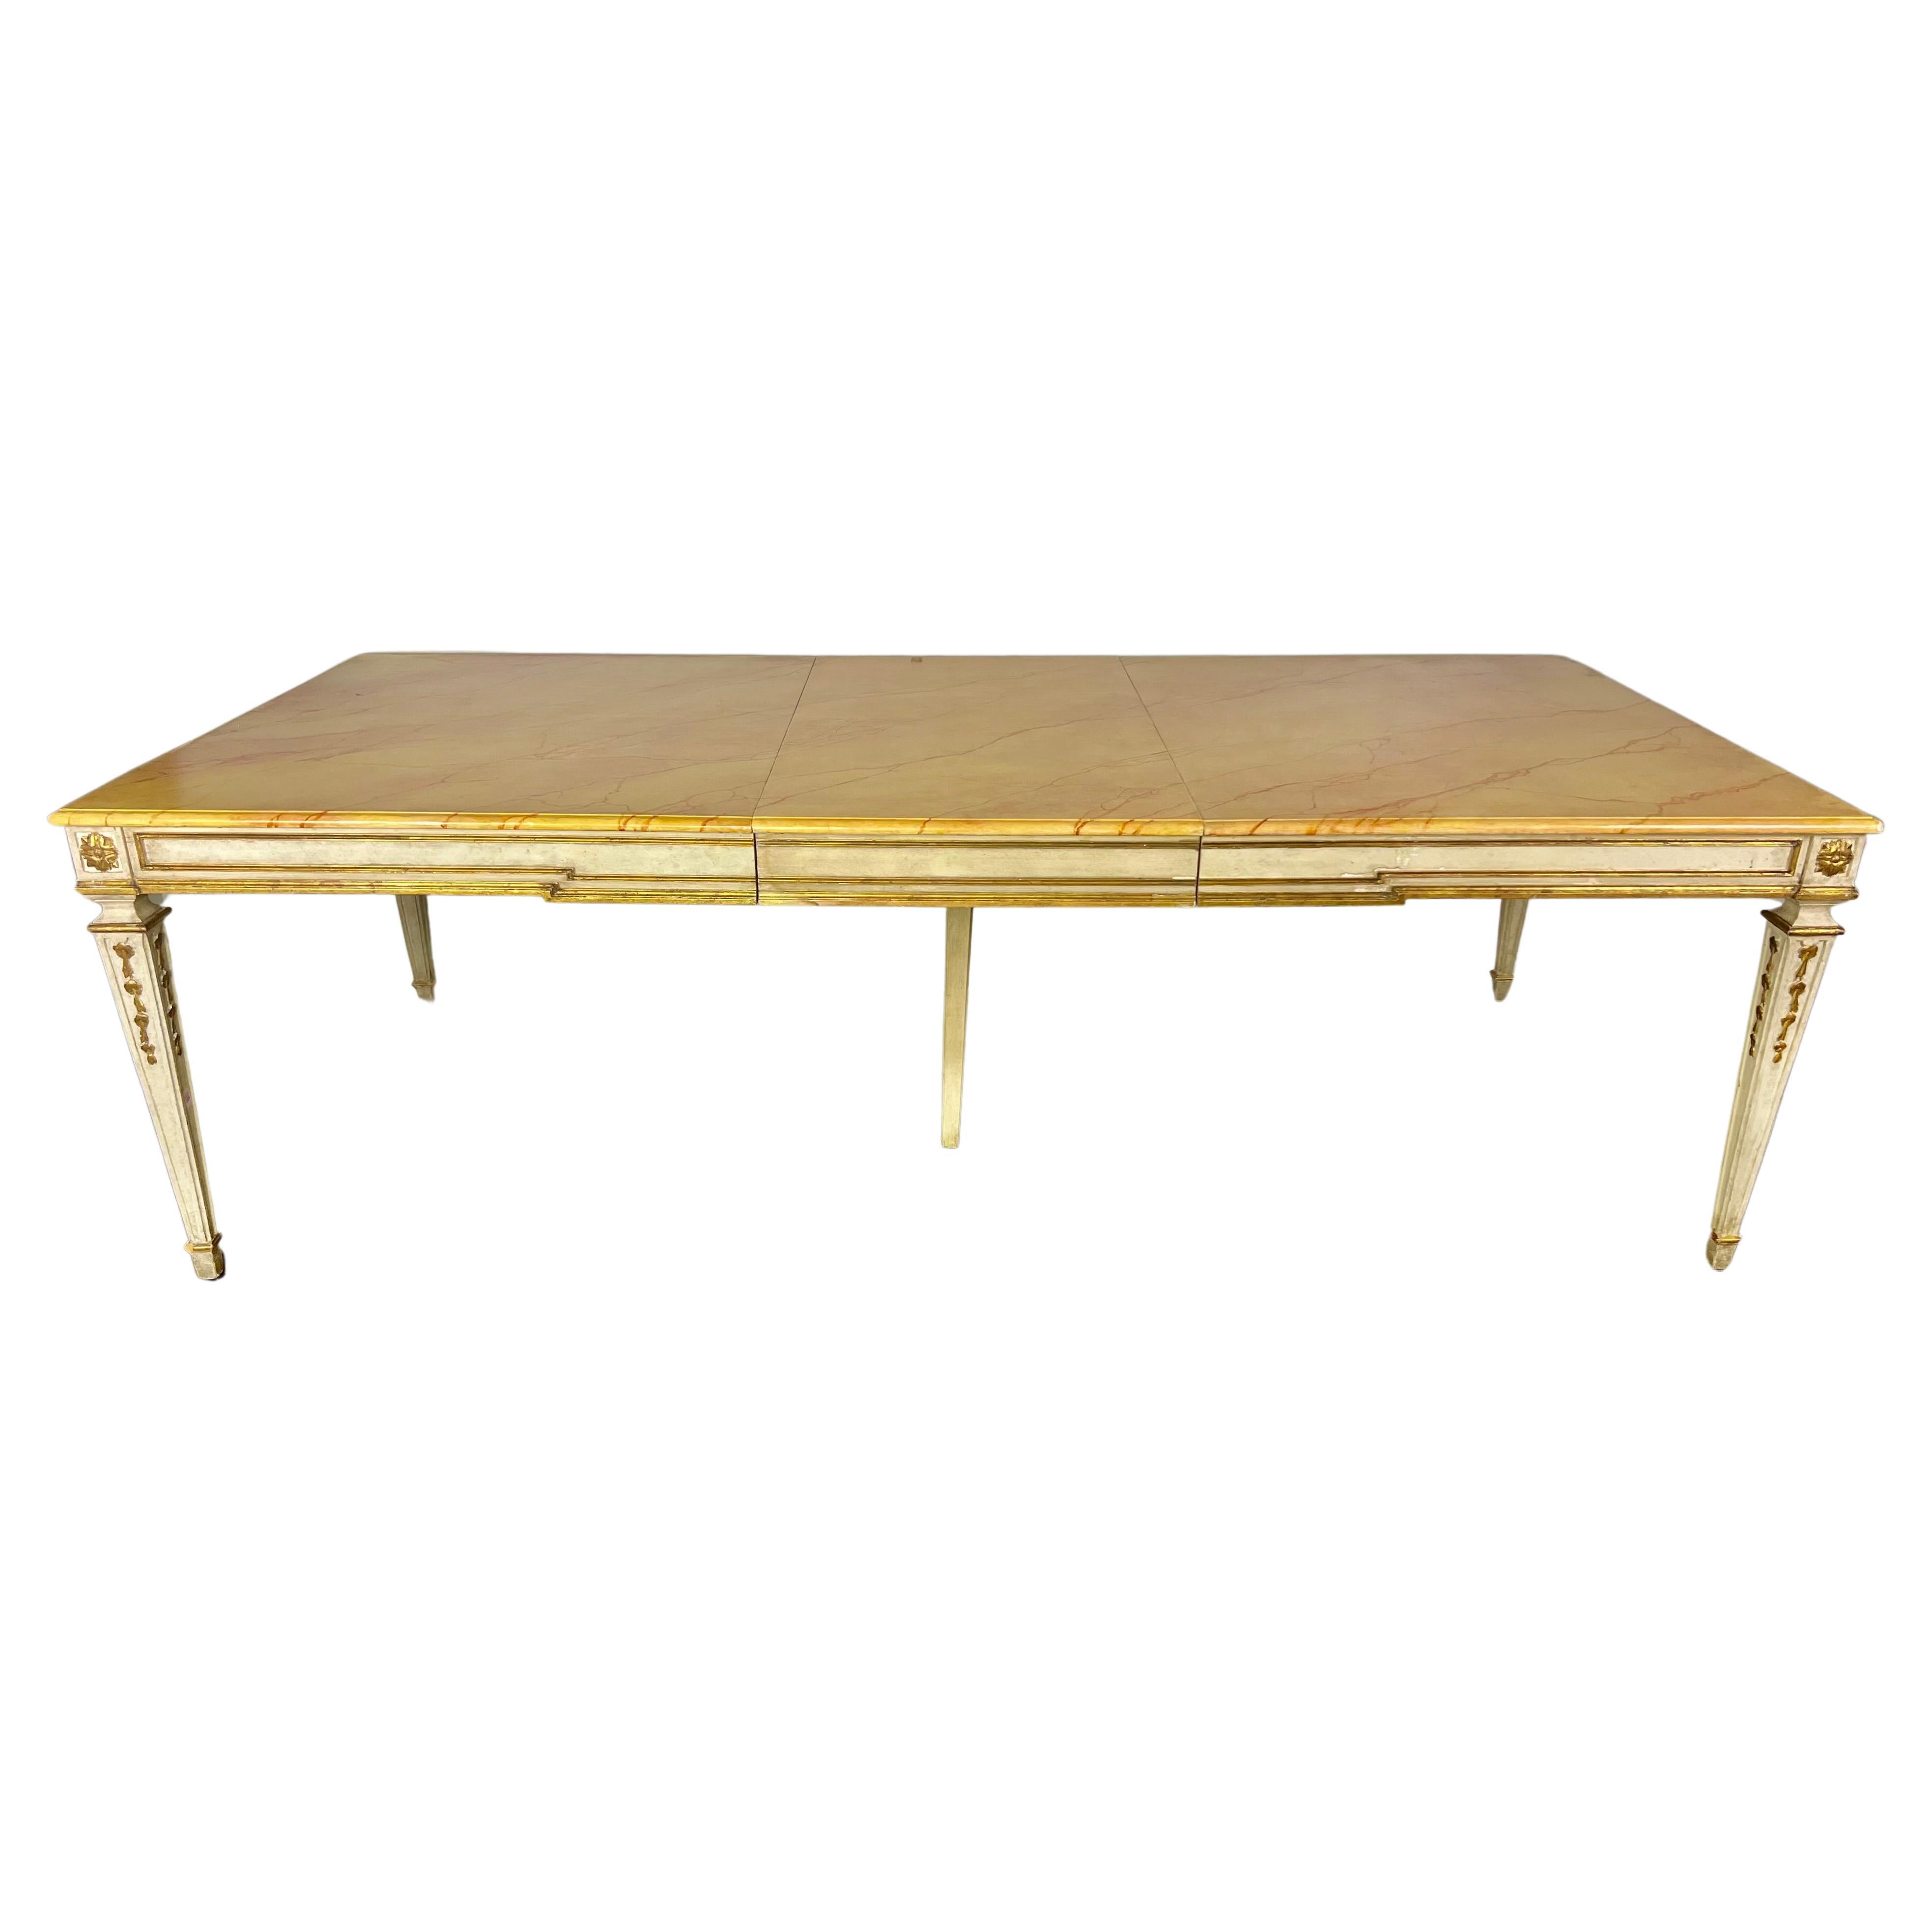 Italian Neoclassical Style Painted & Parcel Gilt Dining Table w/ Faux Marble Top For Sale